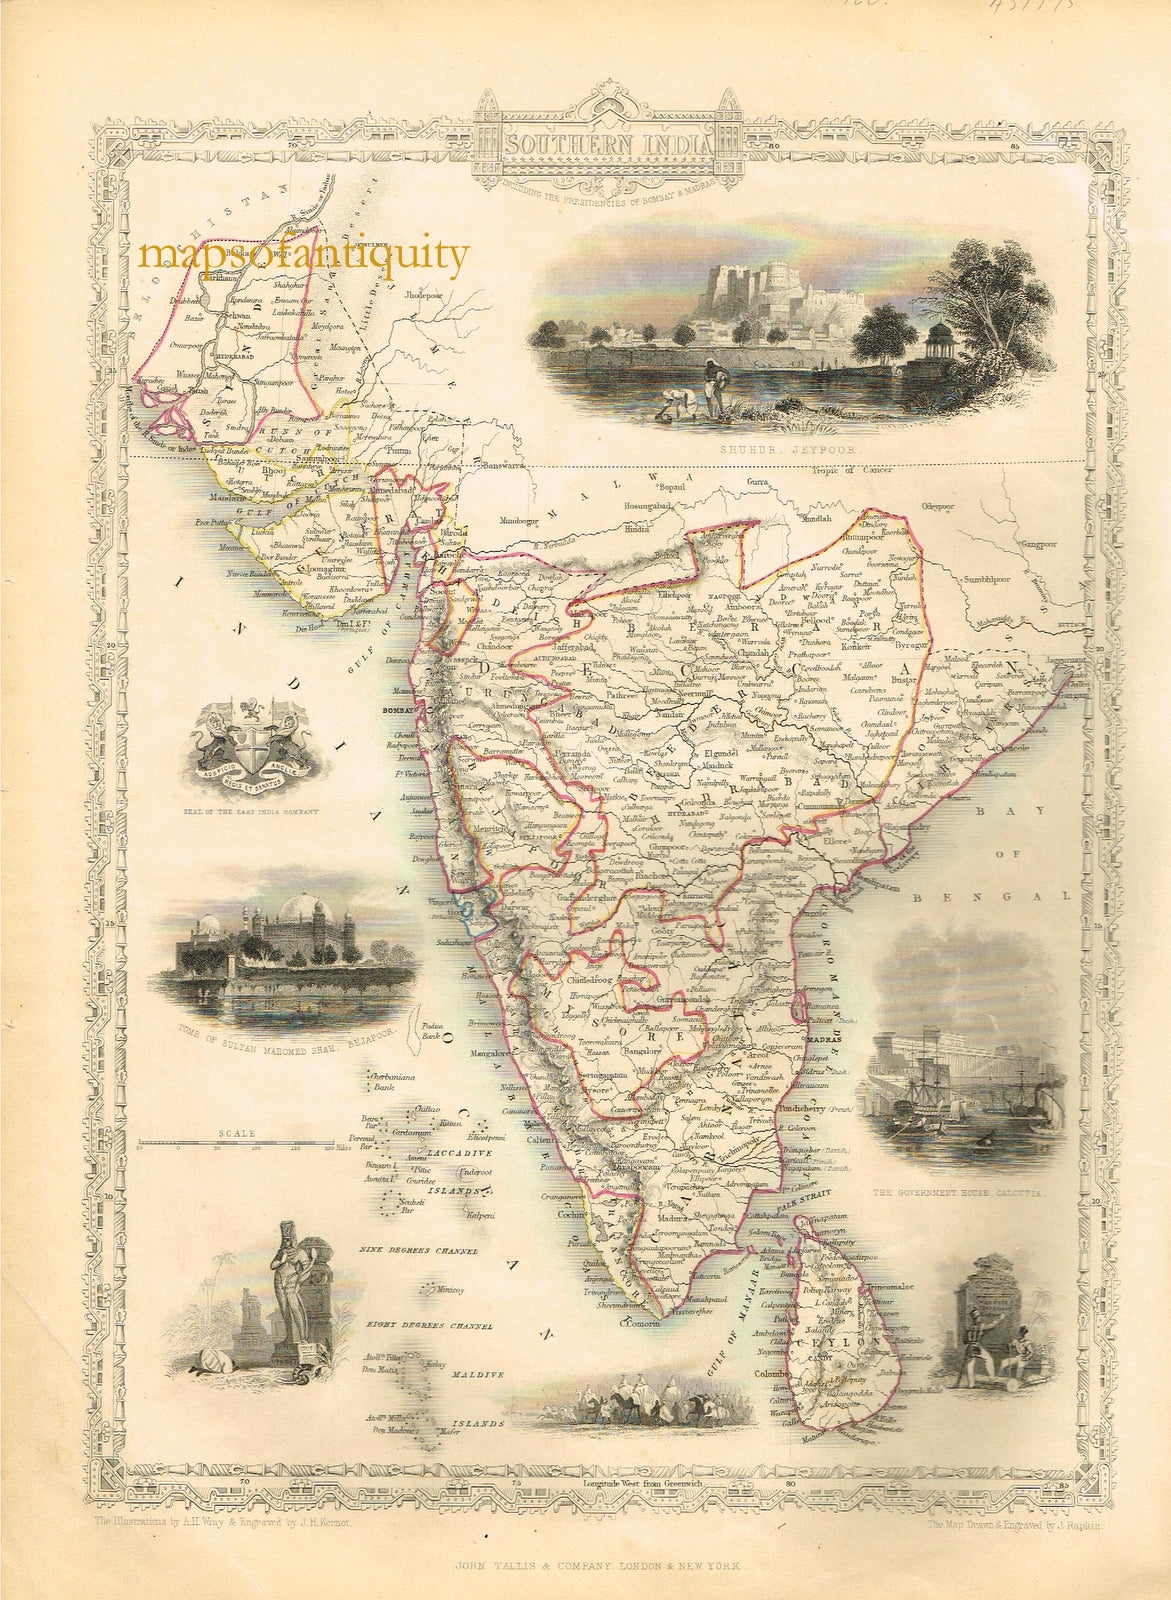 Antique-Hand-Colored-Map-Southern-India-******-Asia-Indian-Subcontinent-1851-Tallis-Maps-Of-Antiquity